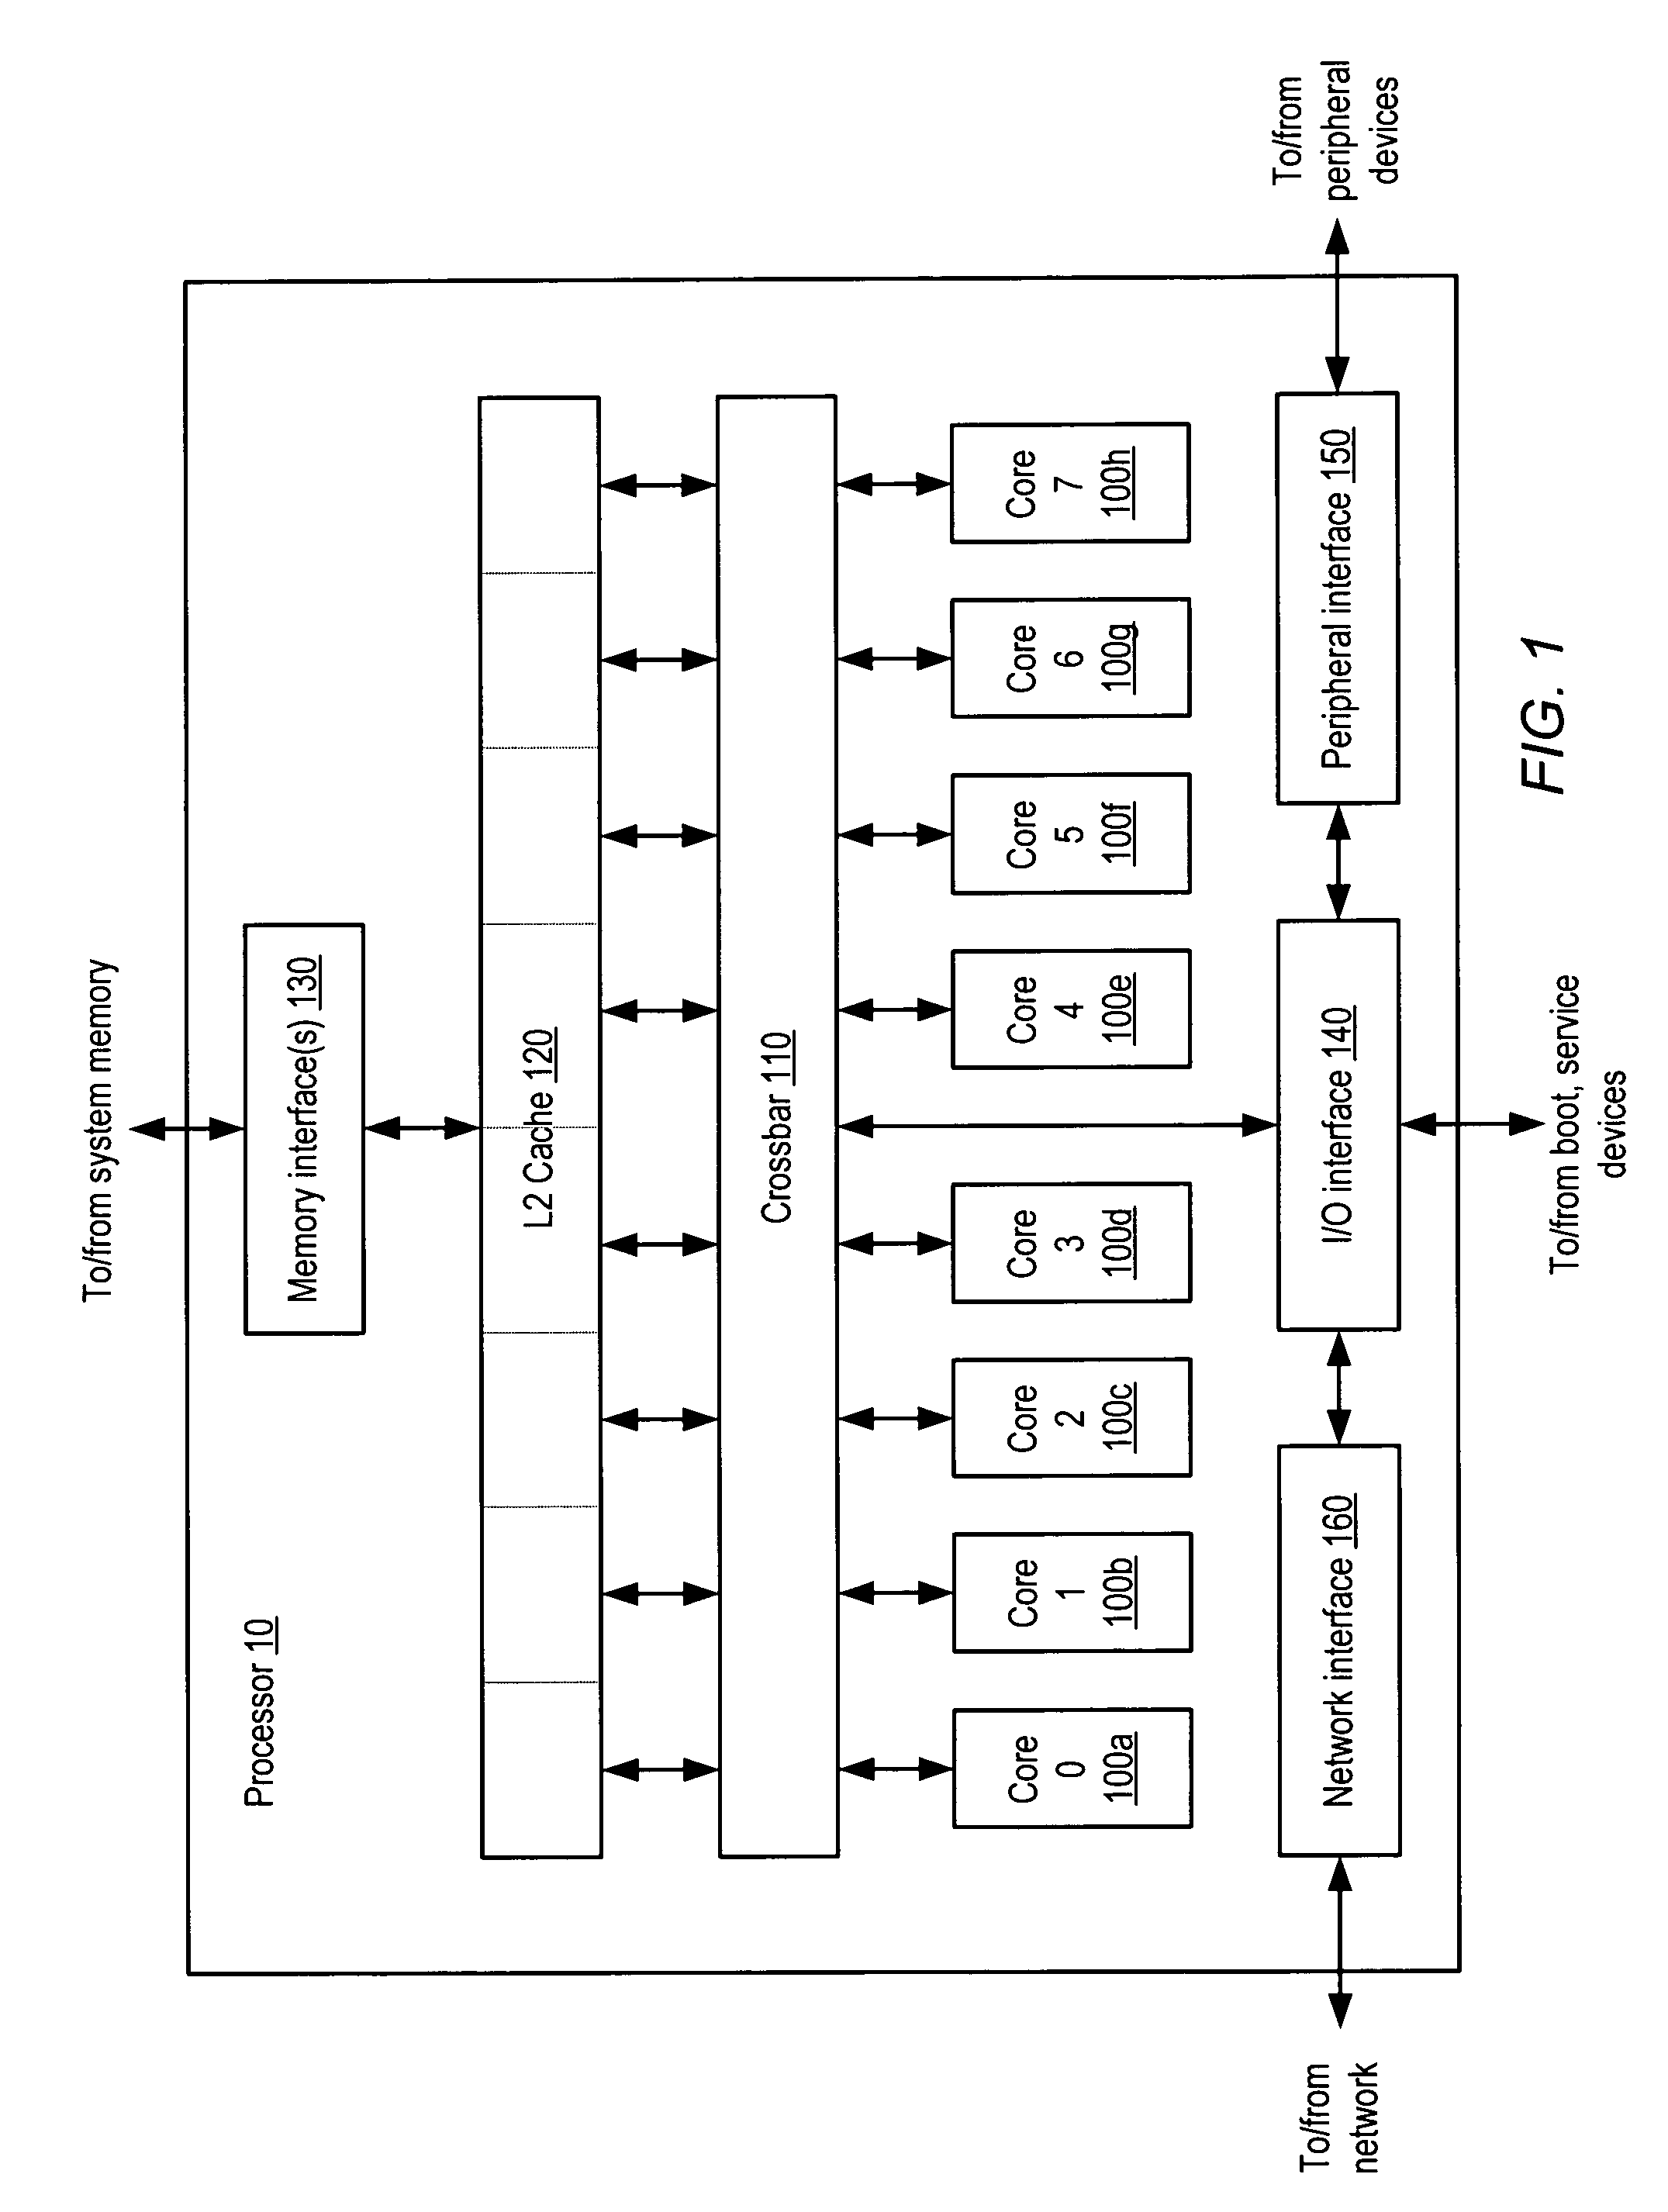 Apparatus and method for implementing a block cipher algorithm